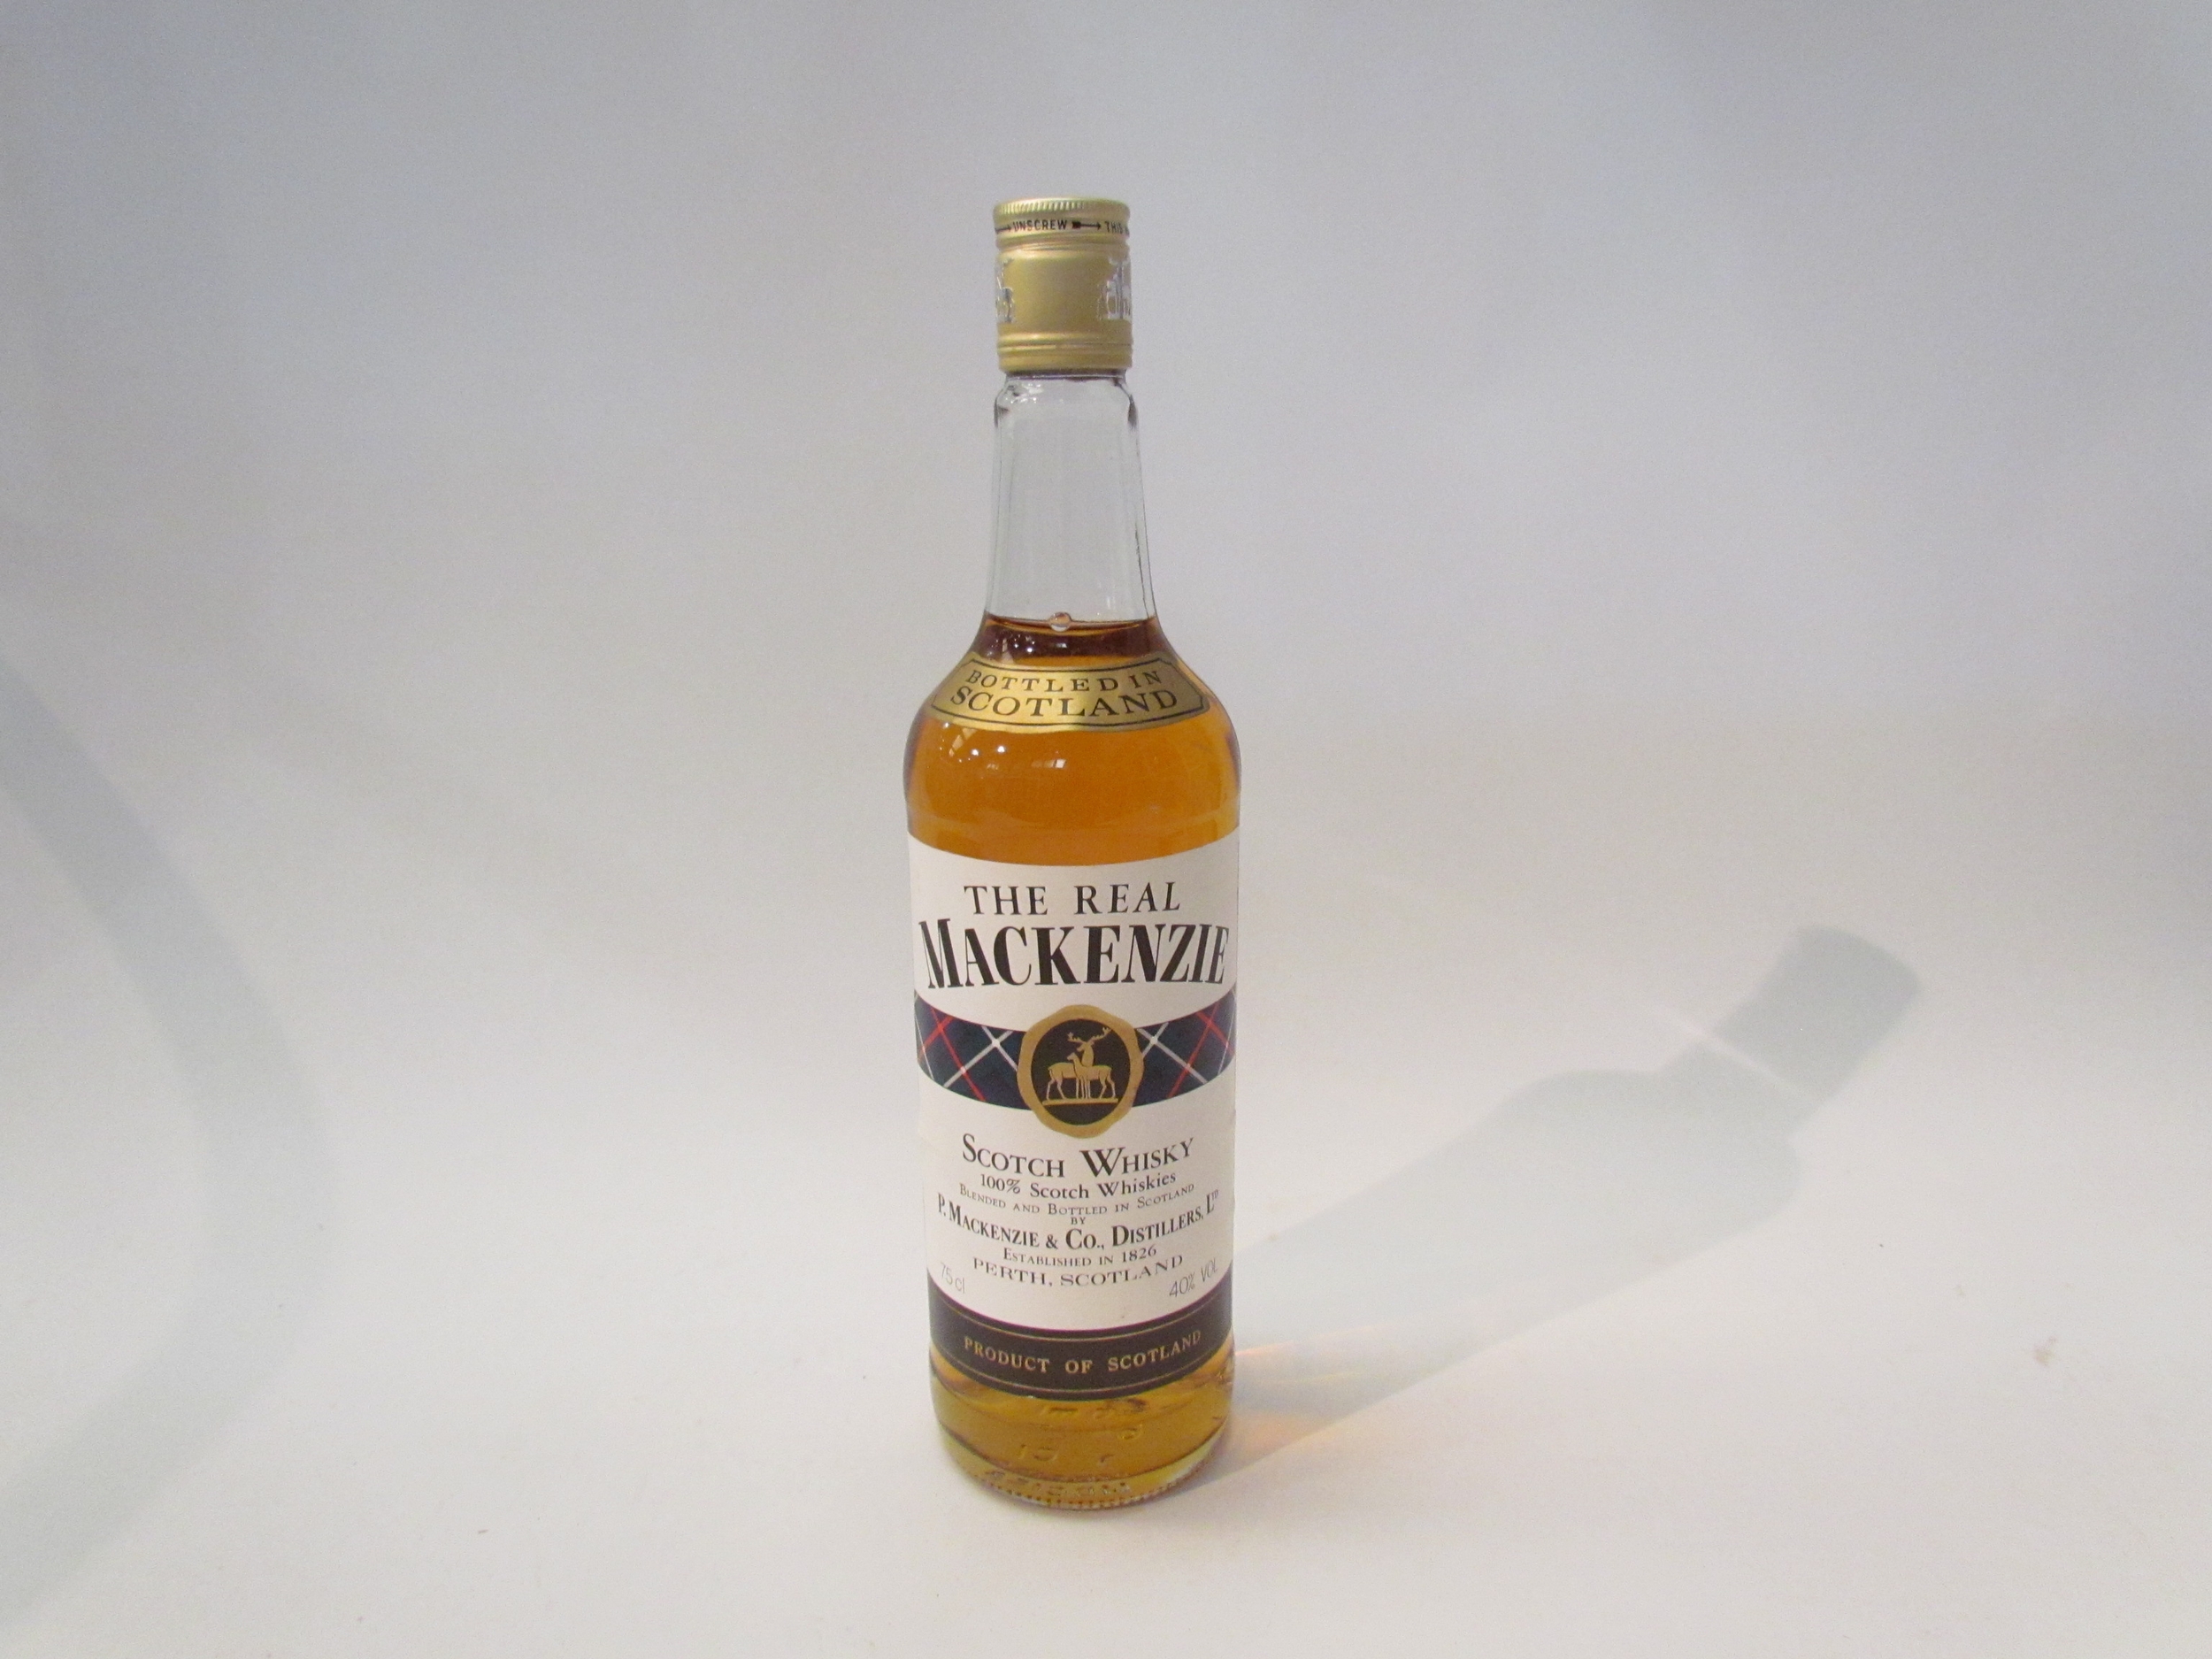 The Real Mackenzie, Scotch Whisky 1970's bottling, 75cl